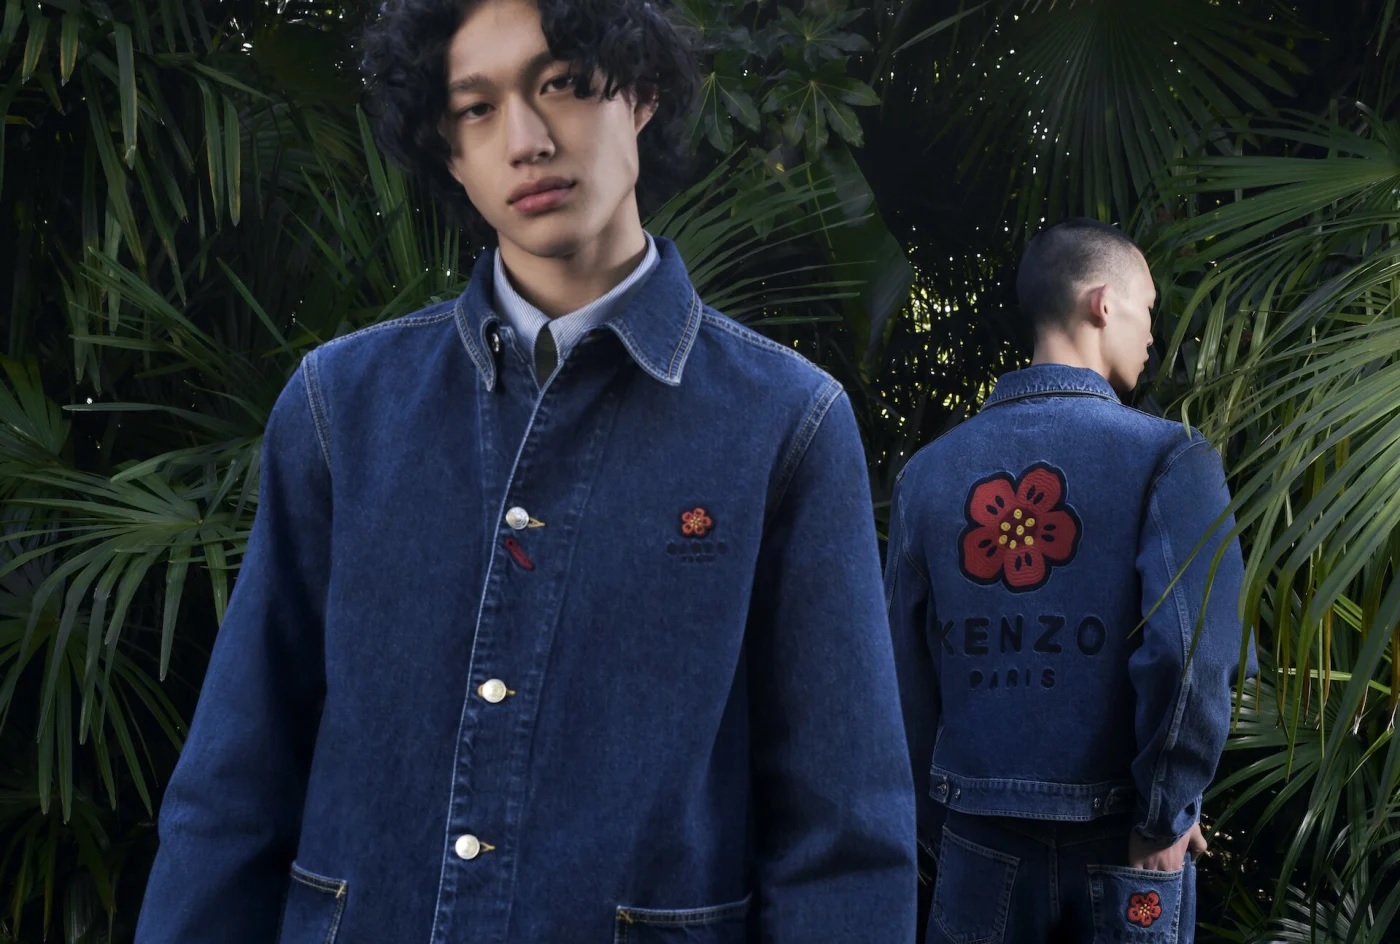 KENZO by Nigo Spring-Summer 2023 Women's and Men's Campaign